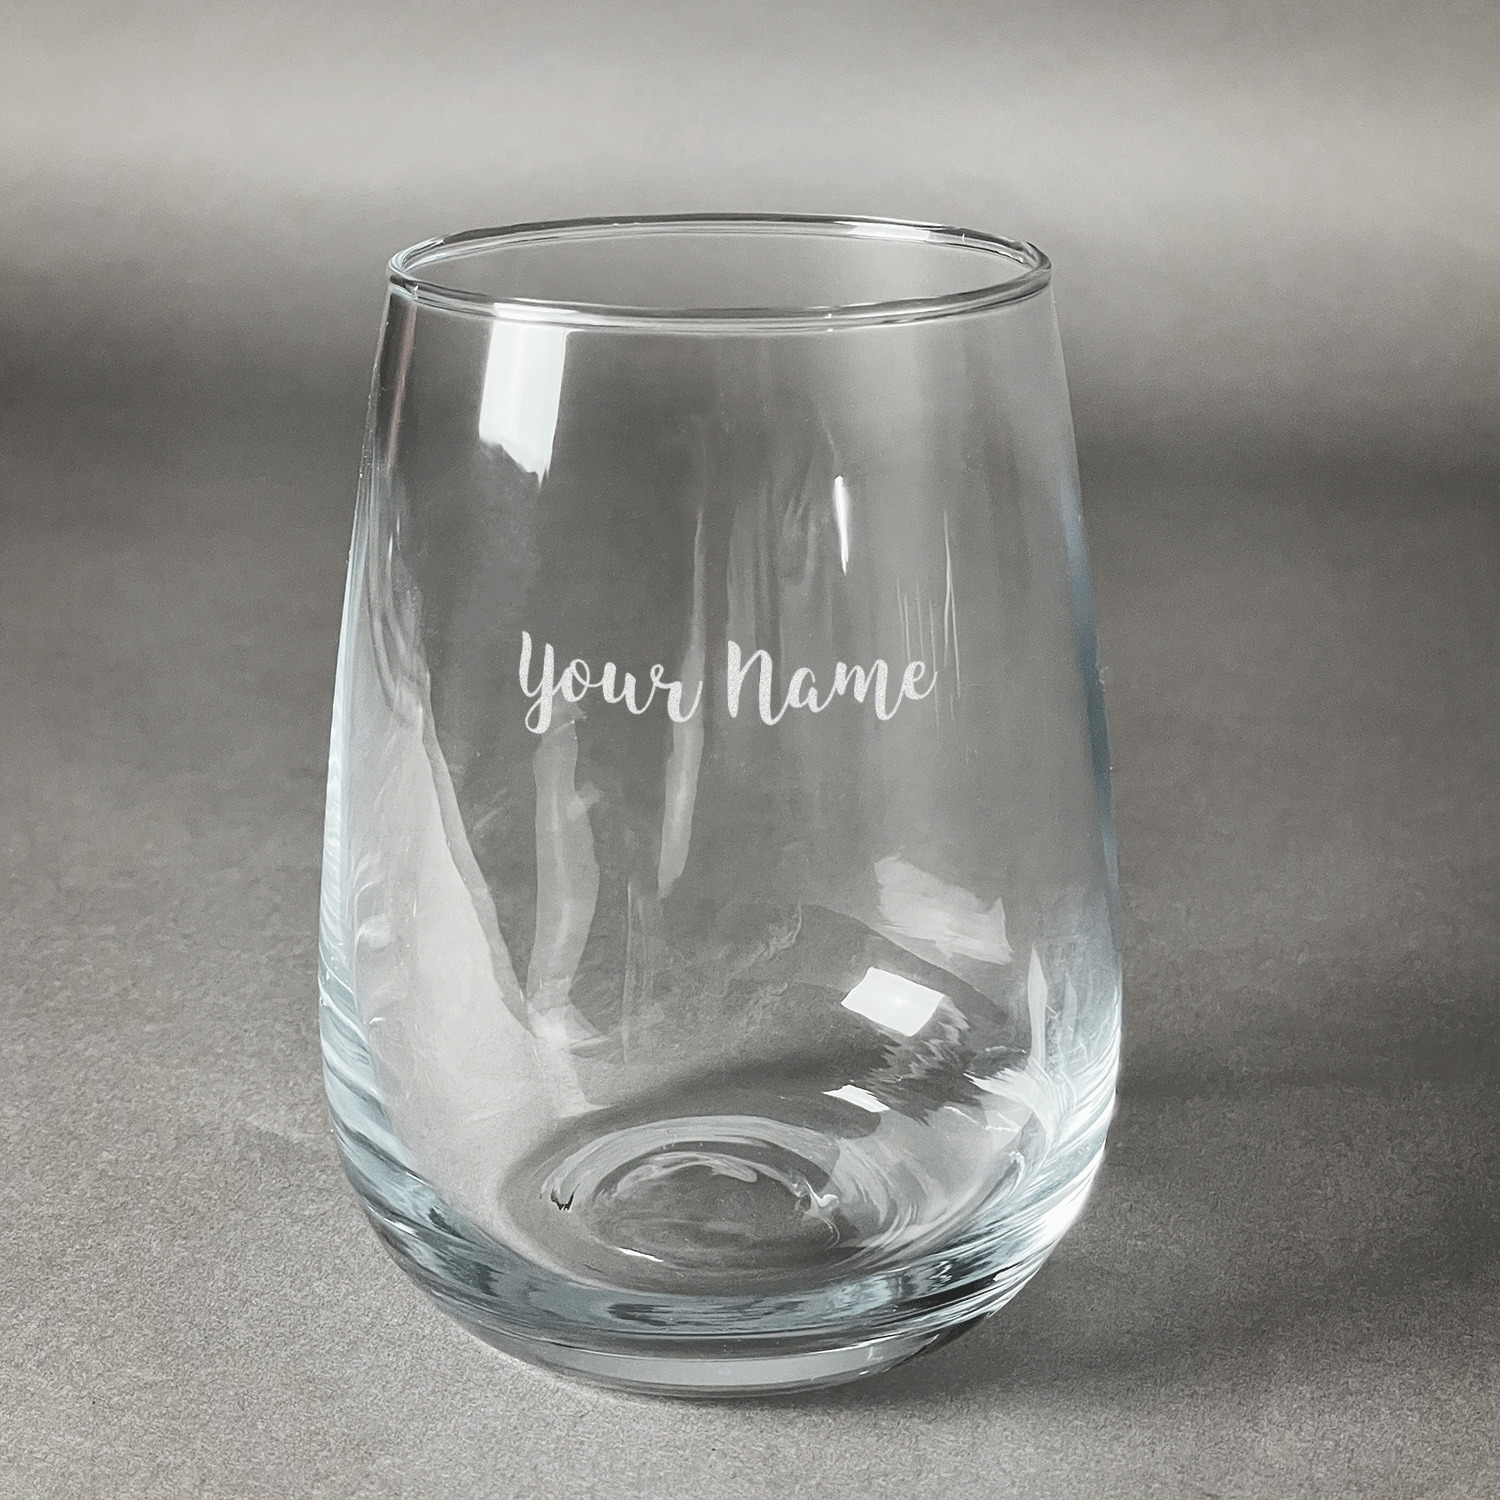 https://www.youcustomizeit.com/common/MAKE/837464/Script-Name-Stemless-Wine-Glass-Front-Approval.jpg?lm=1690555862